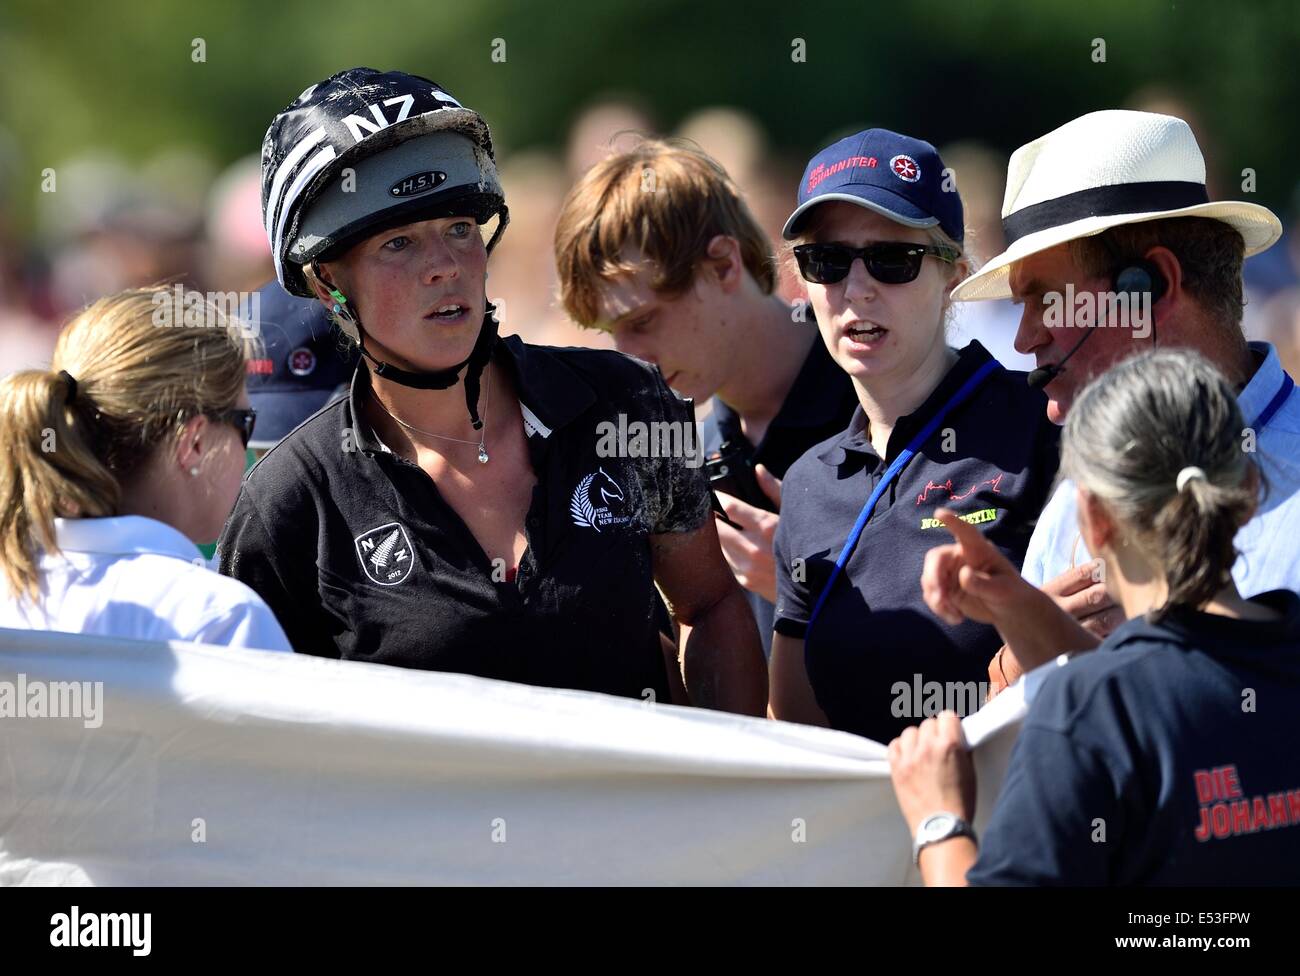 Aachen, Germany. 19th July, 2014. New Zealand rider Lucy Jackson (L) is surrounded by rescue and emergency< staff after her fall during the cross-country discipline of the eventing event of the CHIO in Aachen, Germany, 19 July 2014. Photo: UWE ANSPACH/DPA/Alamy Live News Stock Photo